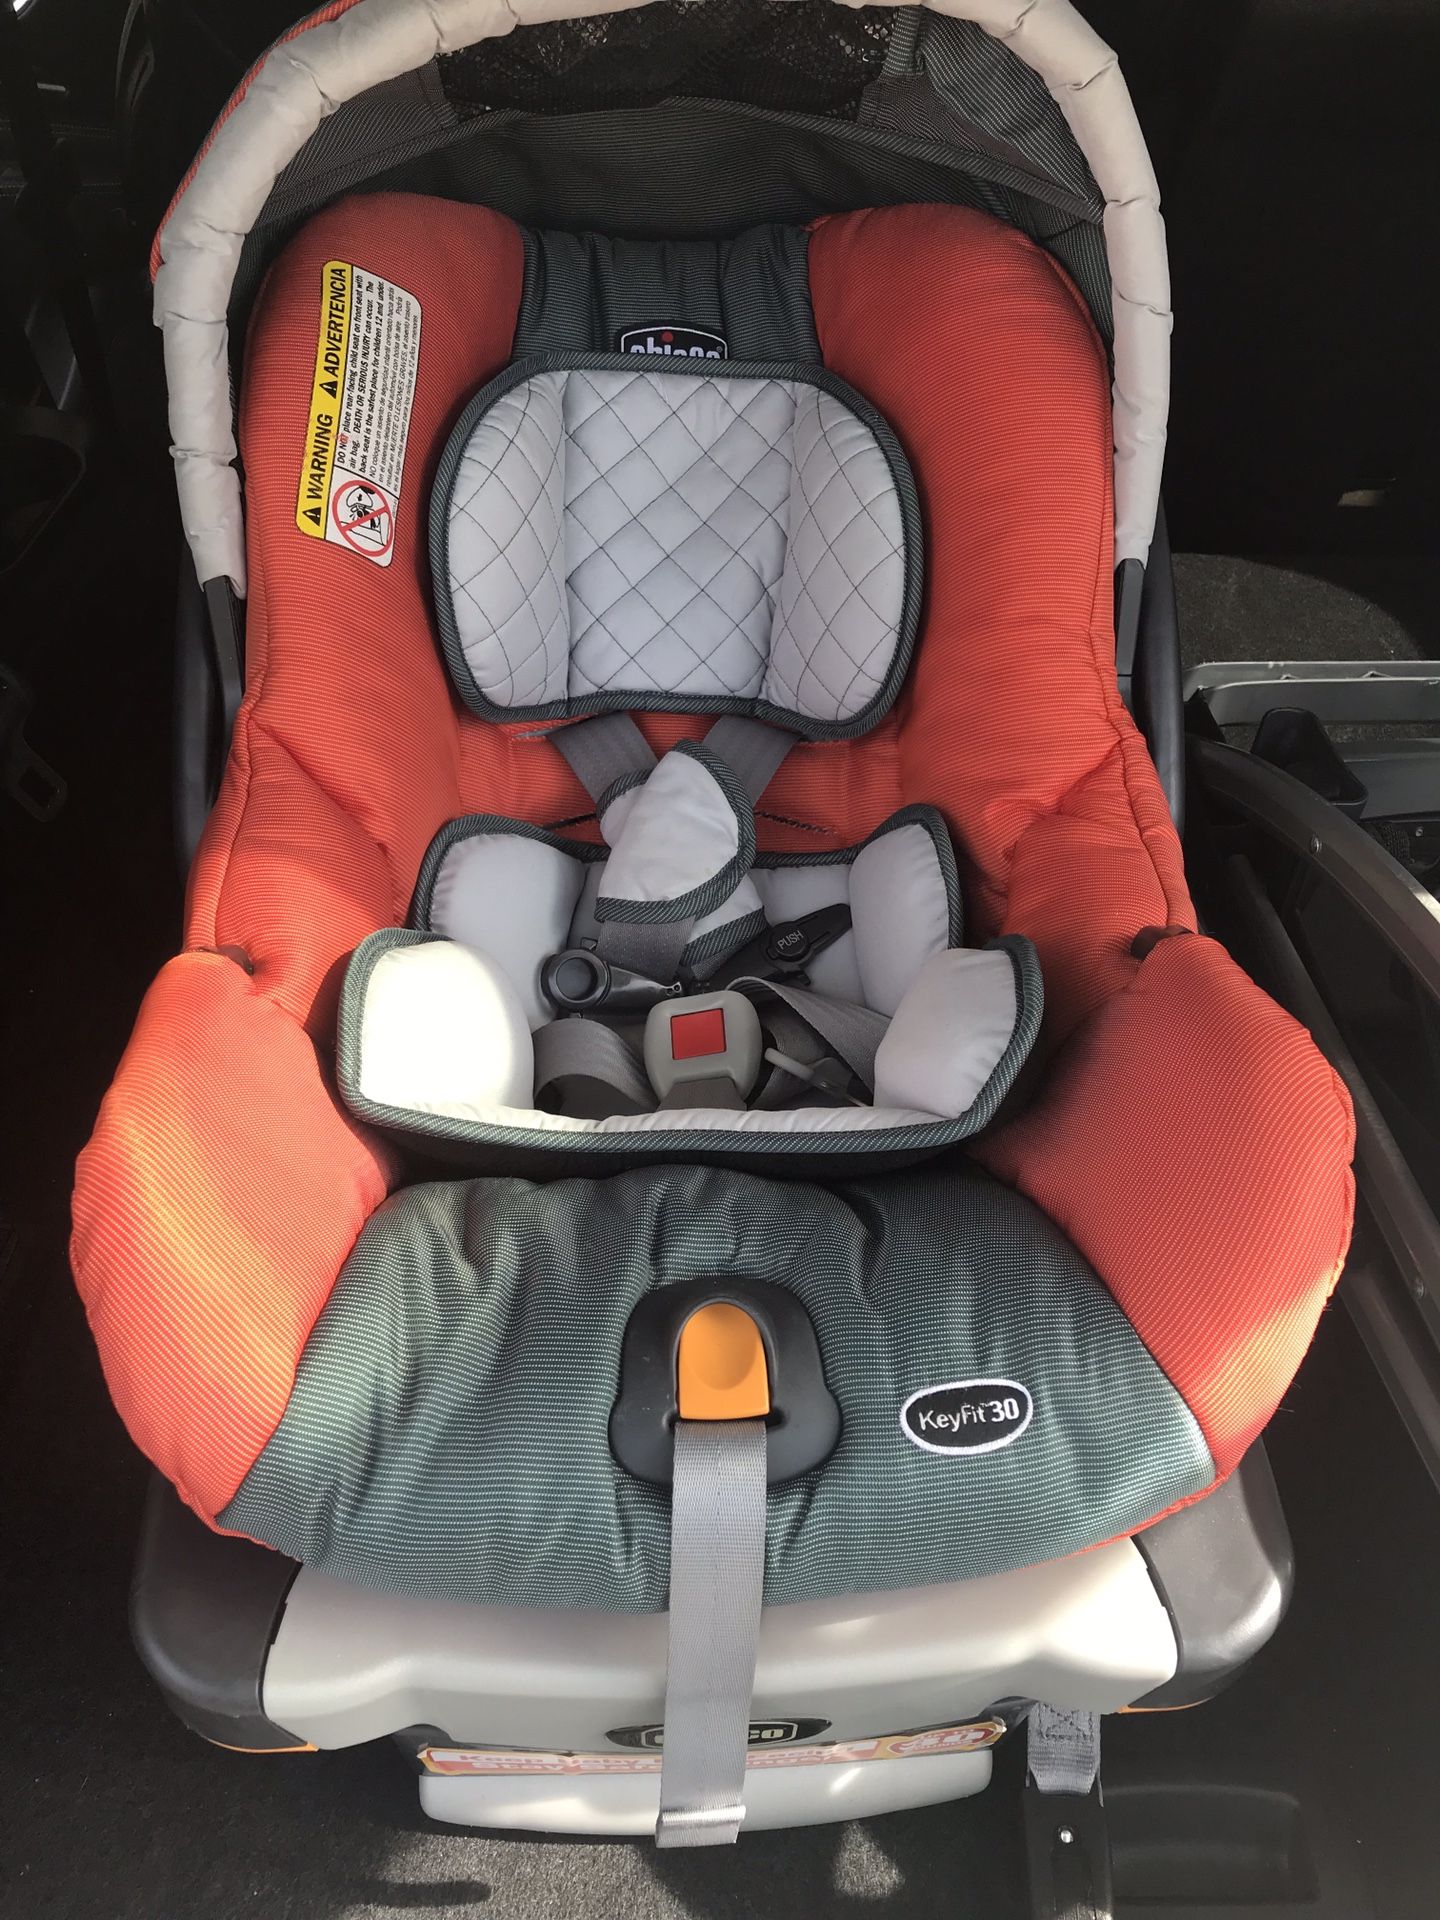 Chicco Car Seat, Base and Stroller “Key Fit” Caddy